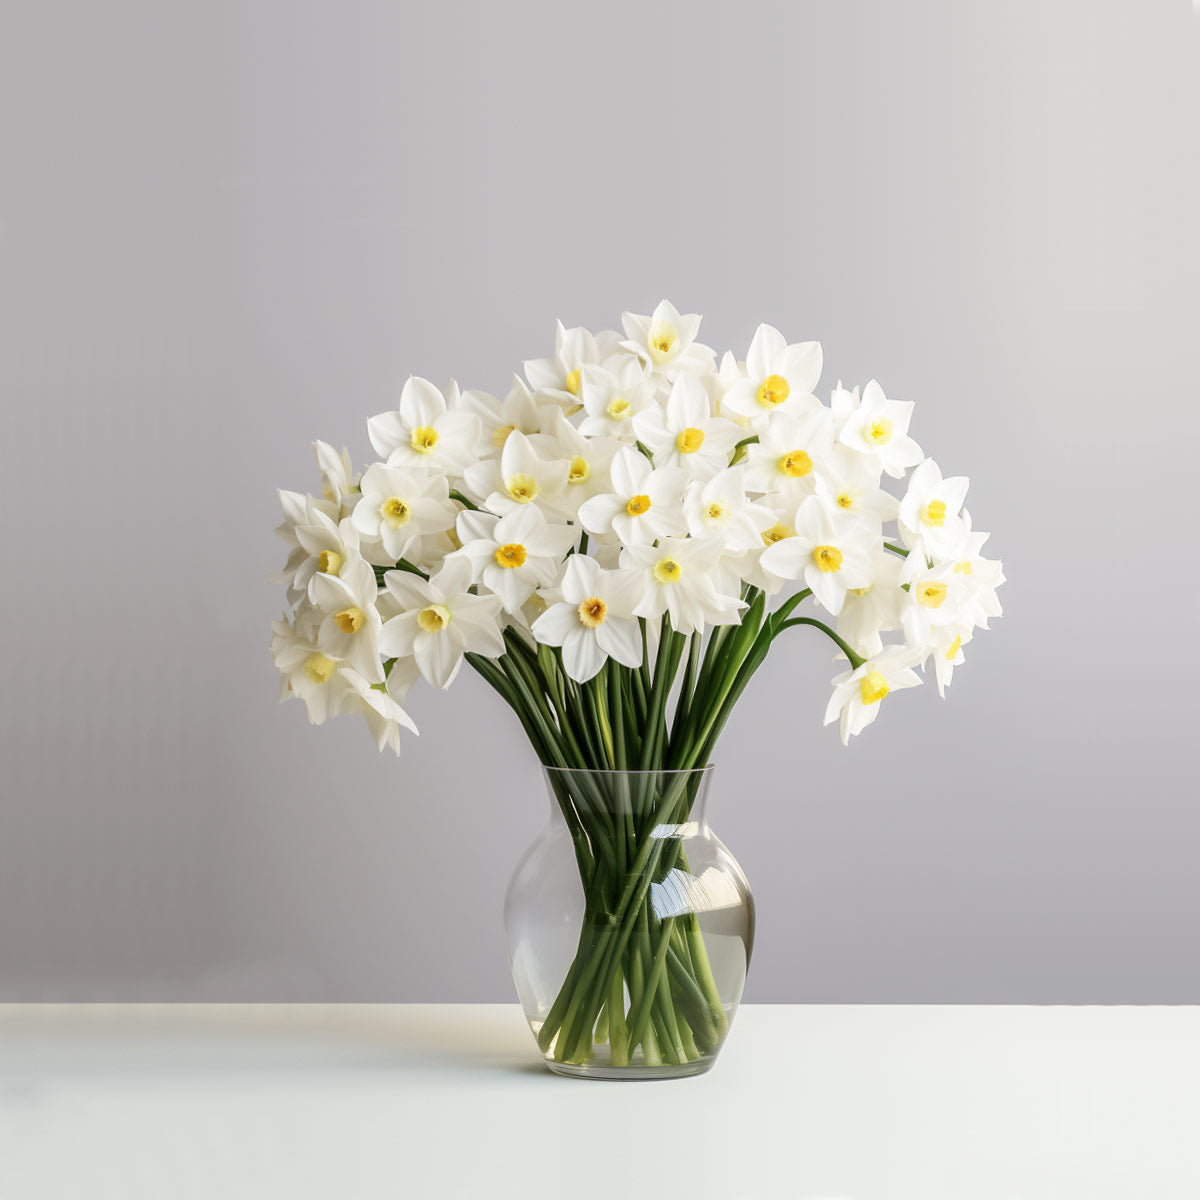 White Narcissus Flower Delivery UK Next Day